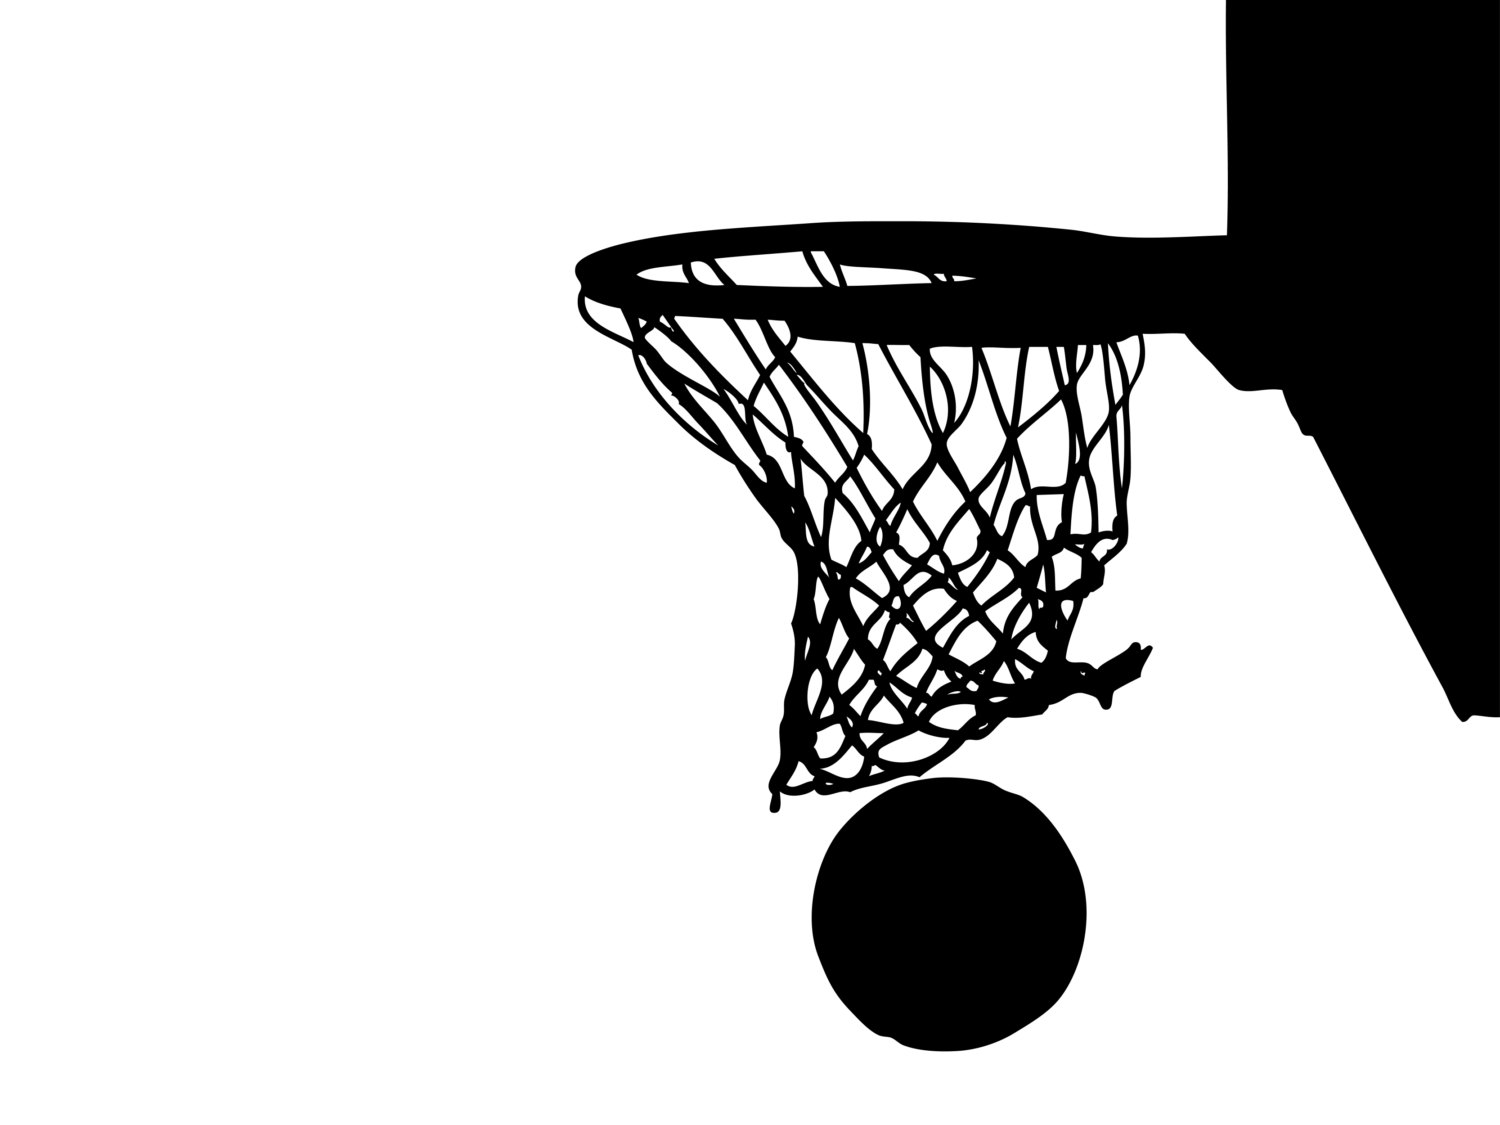 Image gallery for : black and white basketball net photography